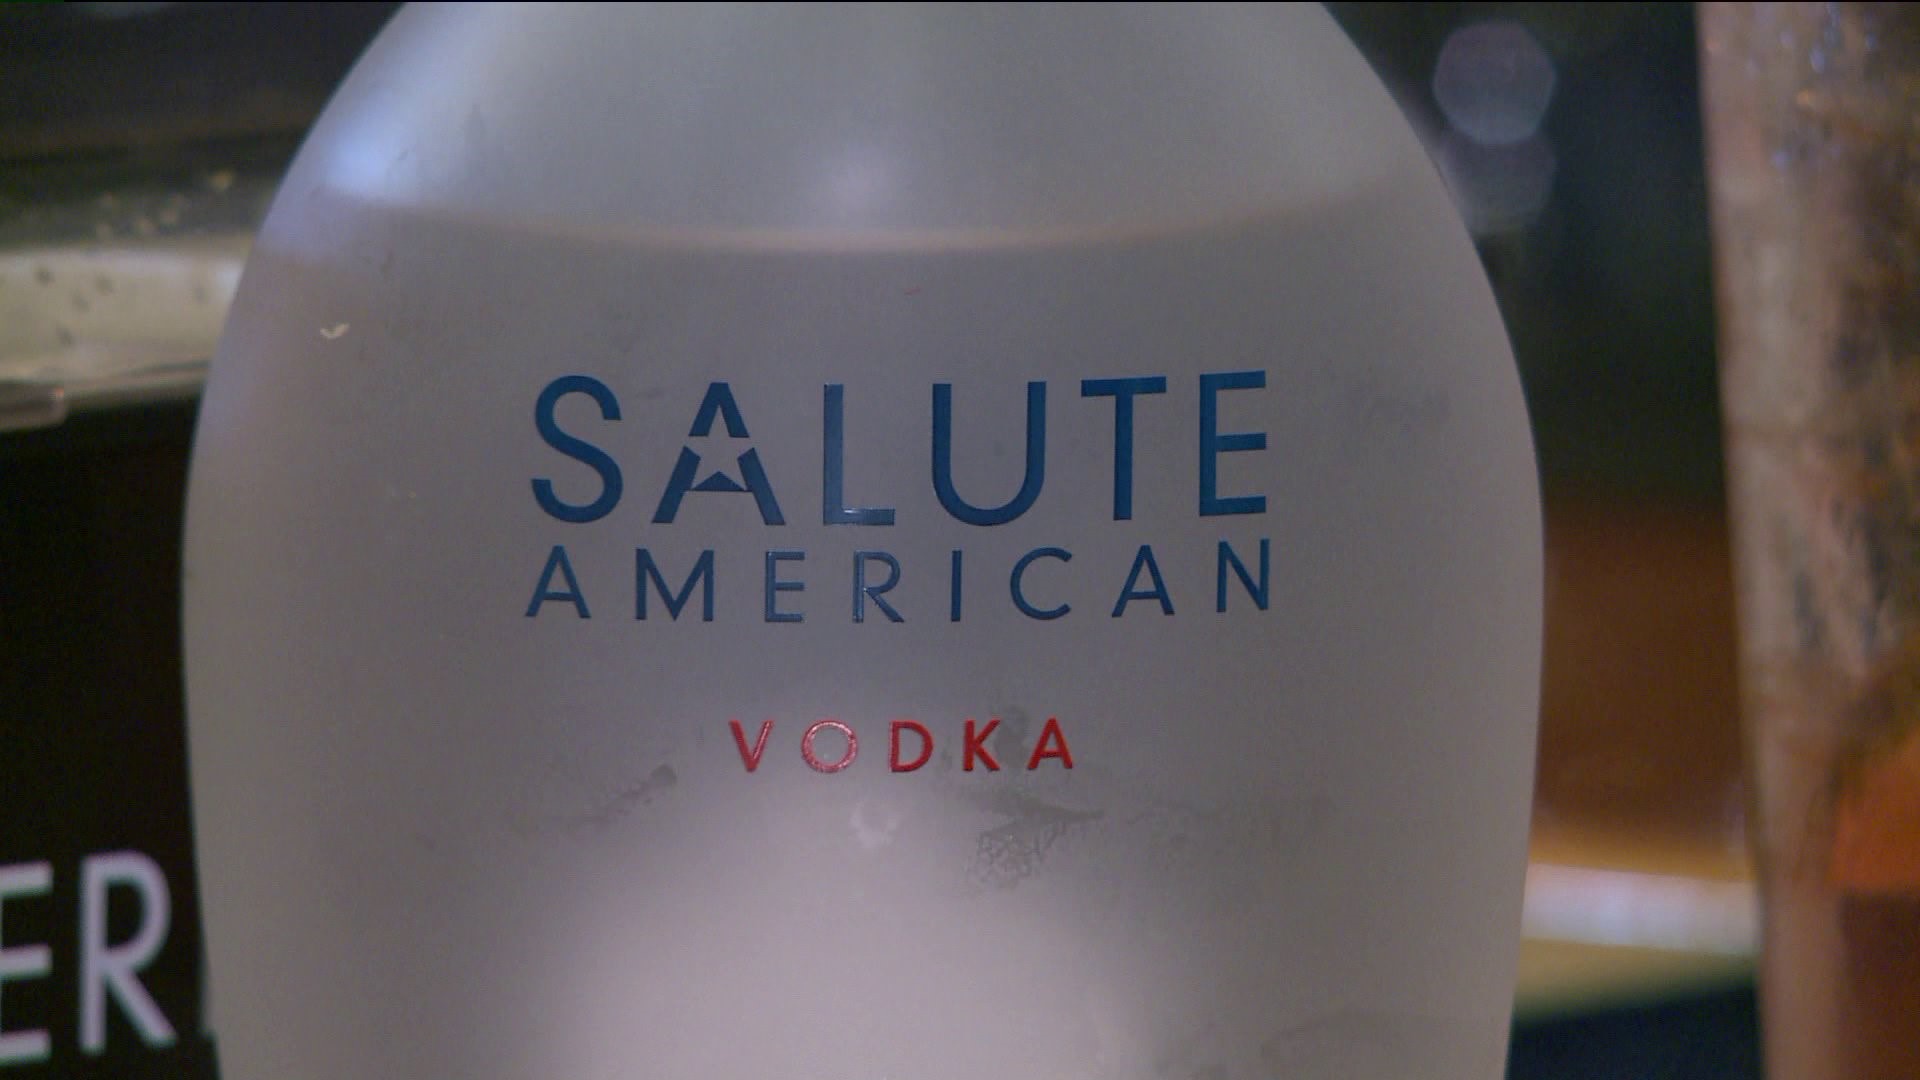 CT-based vodka company helps vets get back on their feet